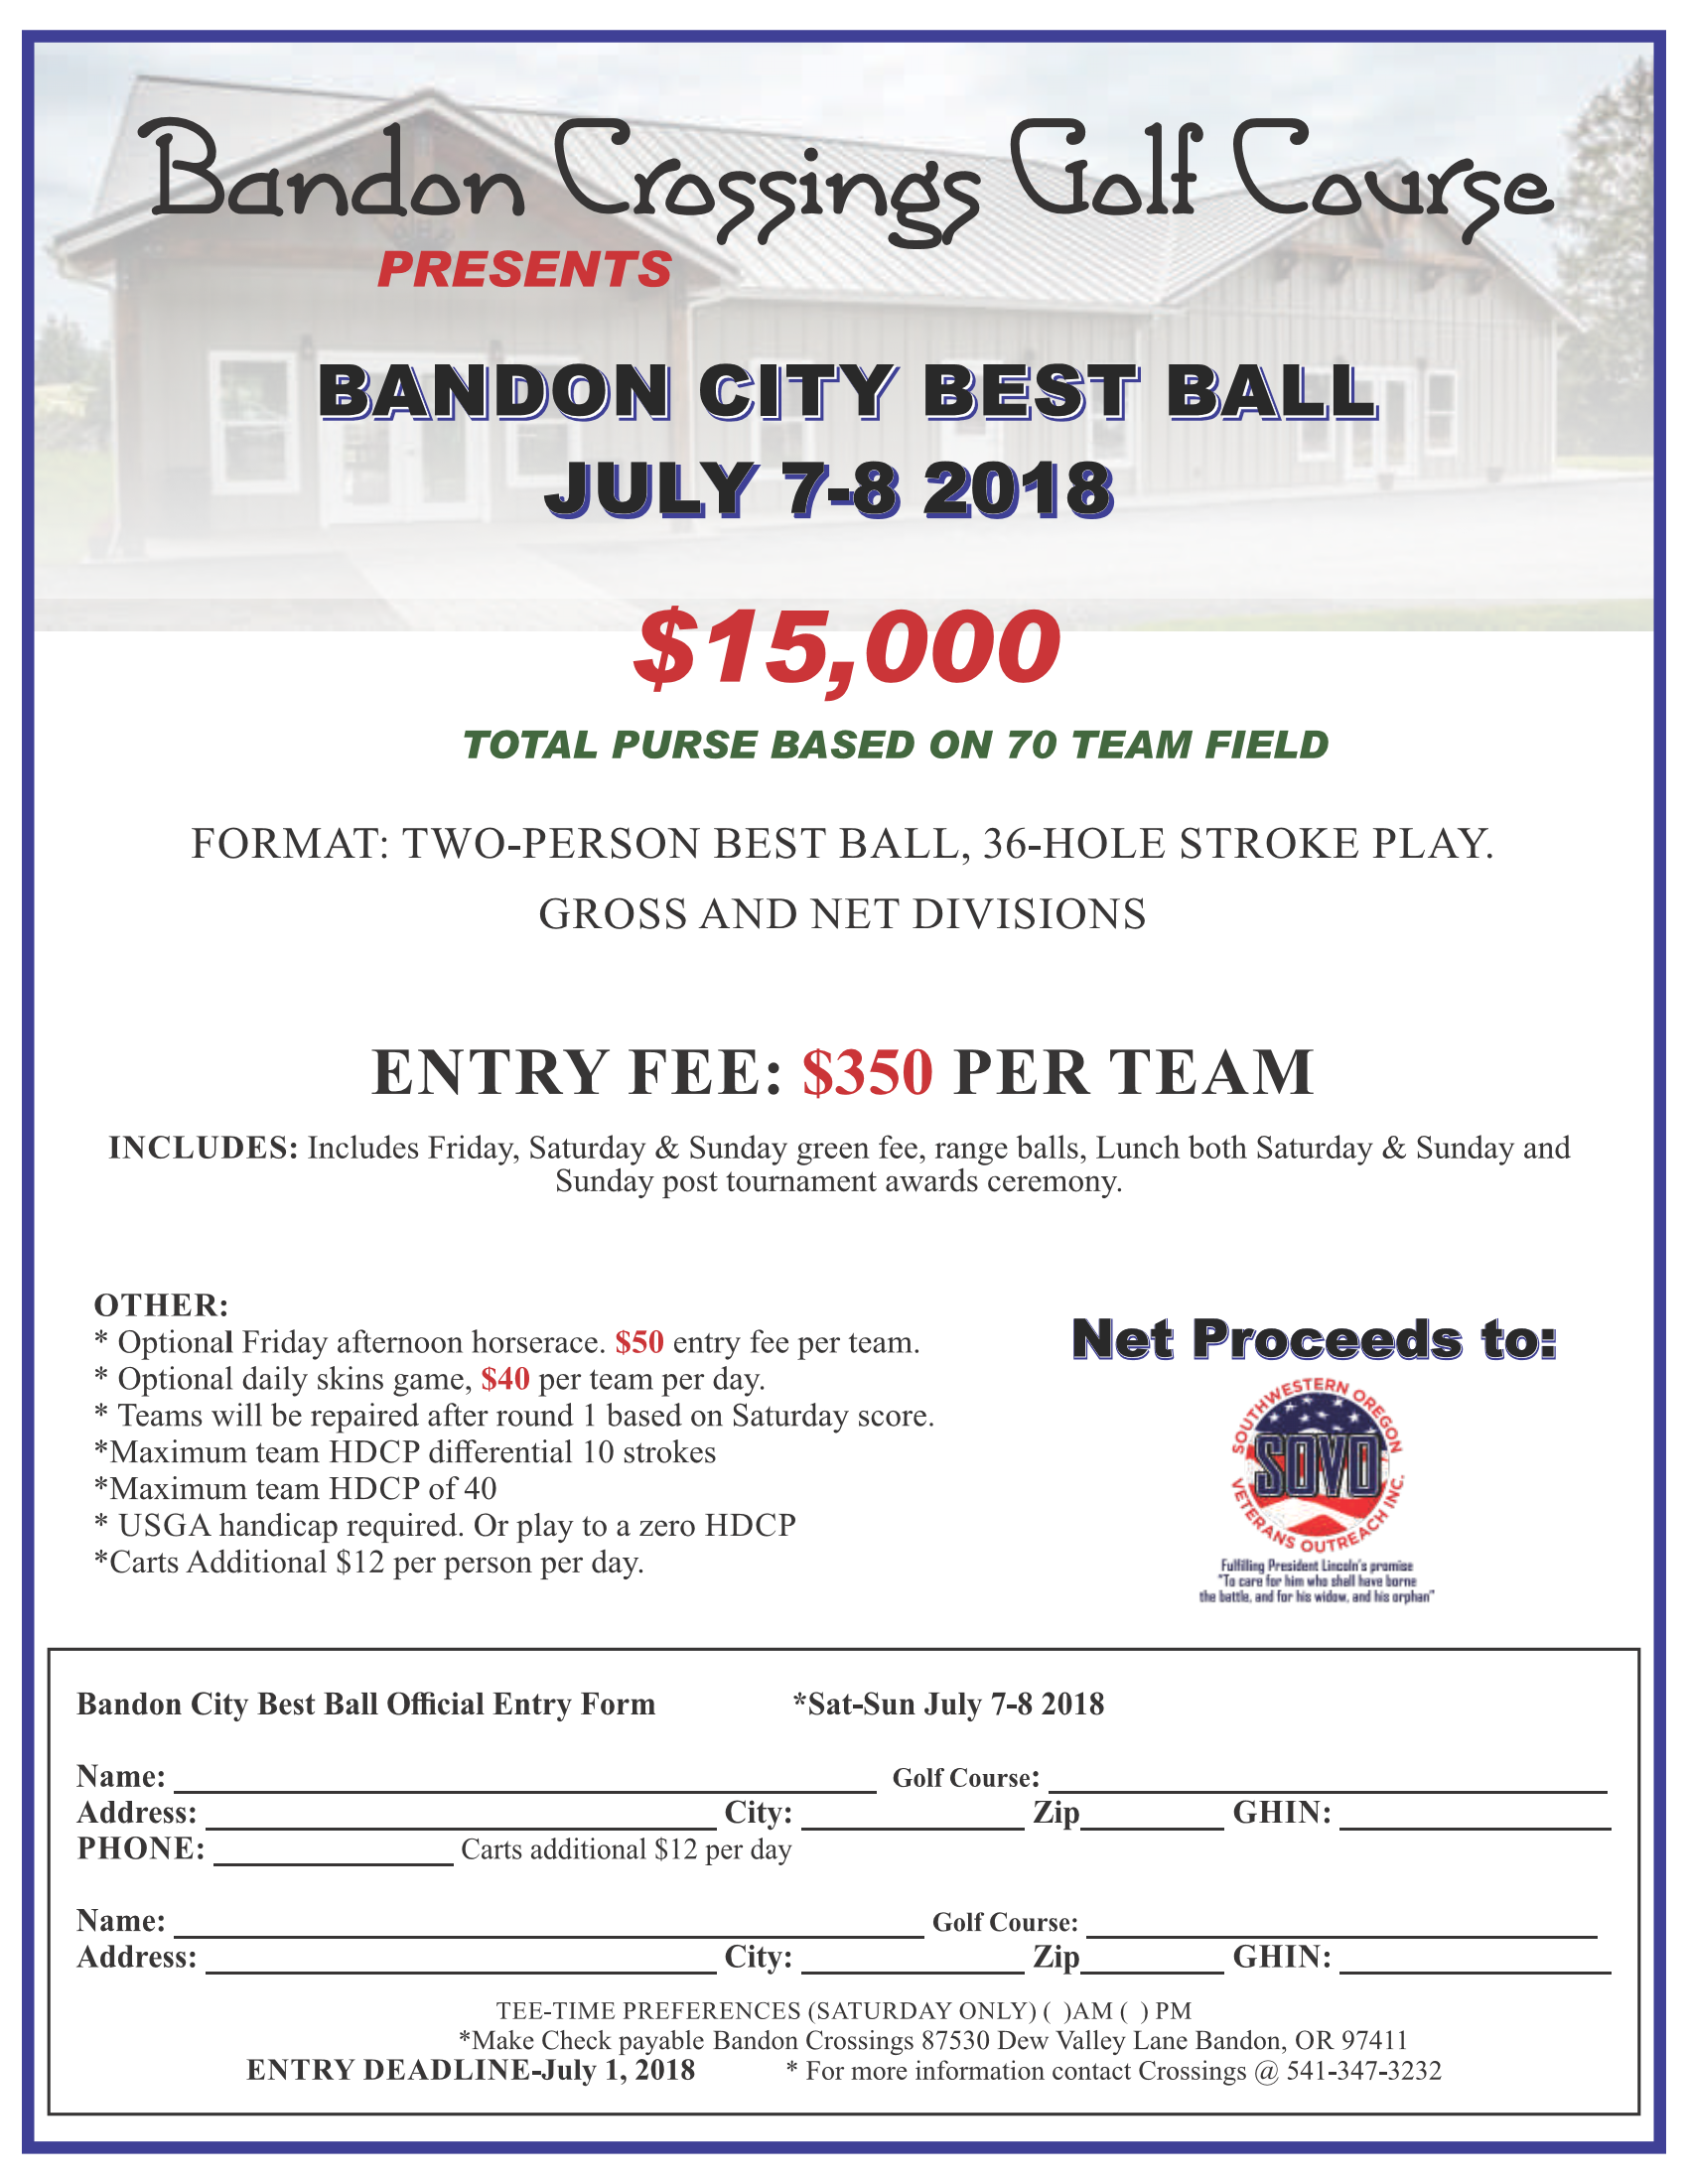 Bandon City Best Ball Flyer with border Page 1